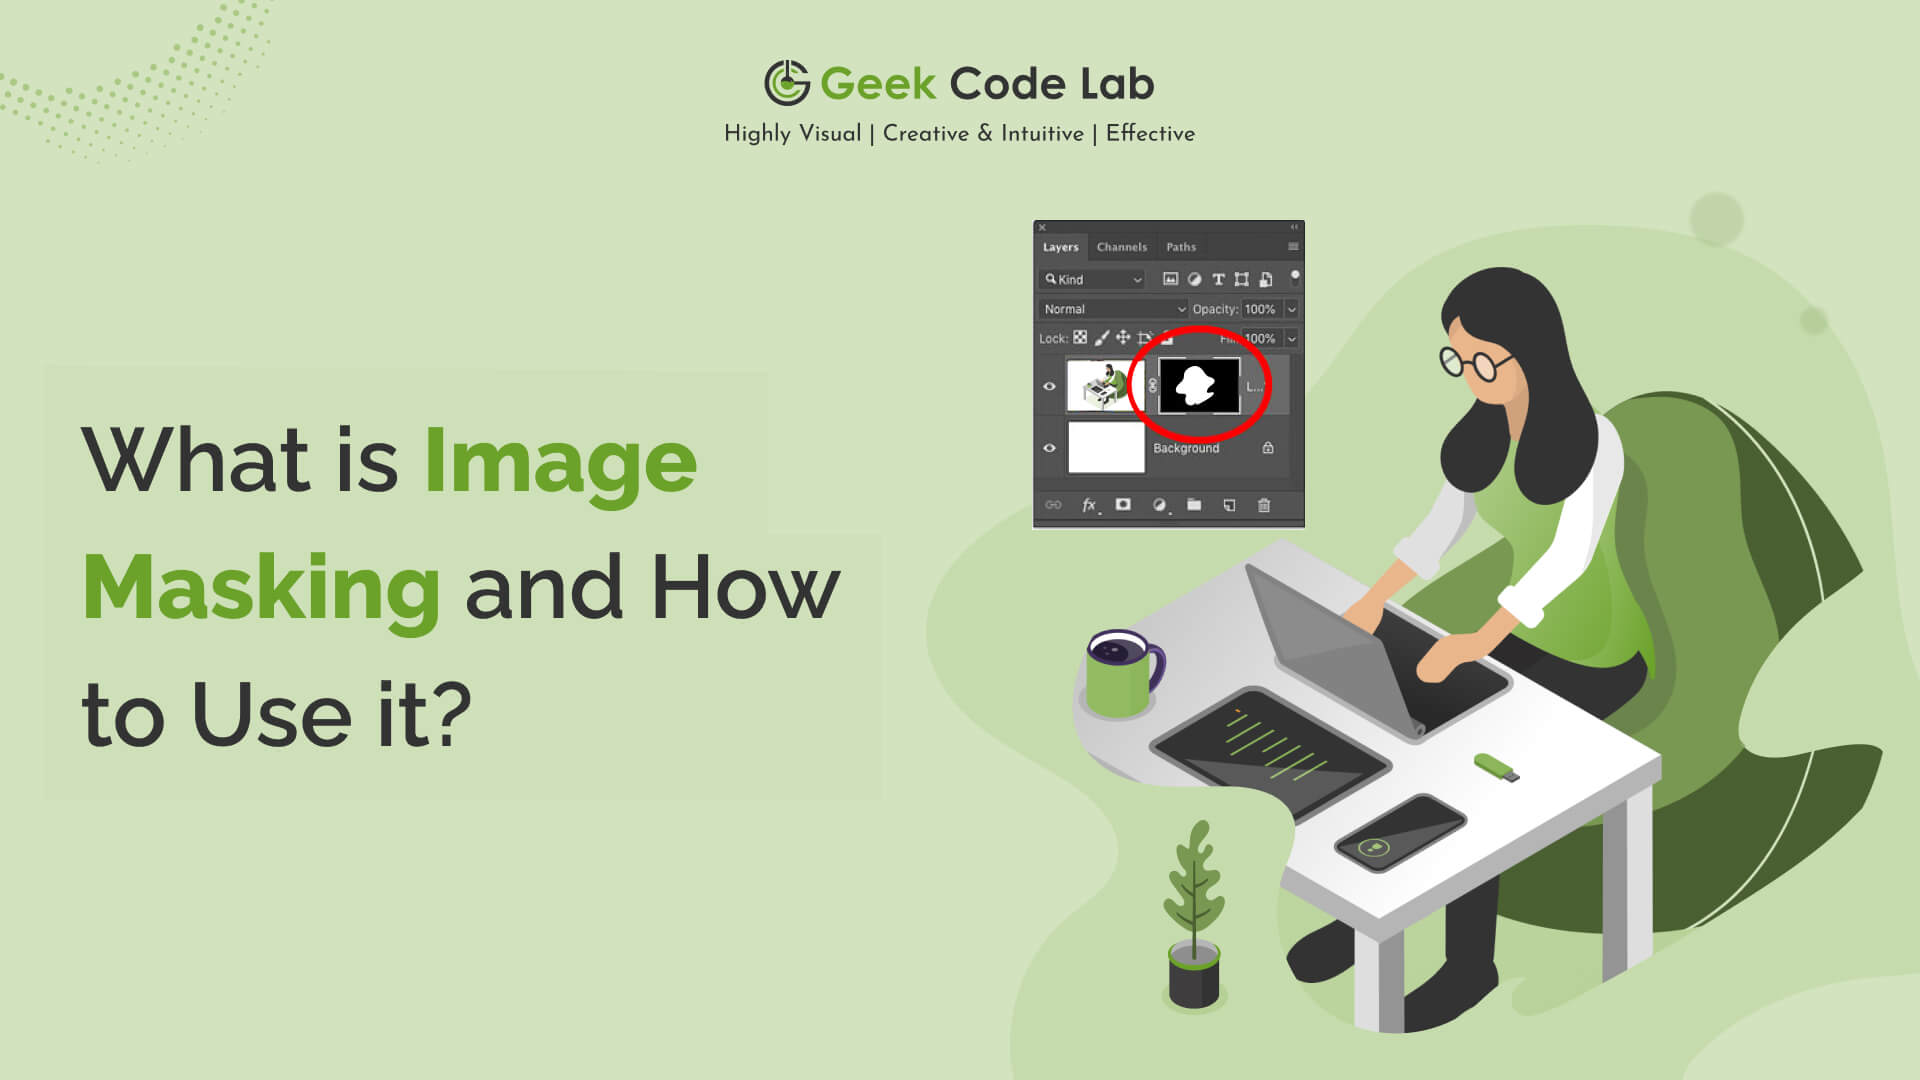 How to Use Image Masking to Enhance Your Images Quality